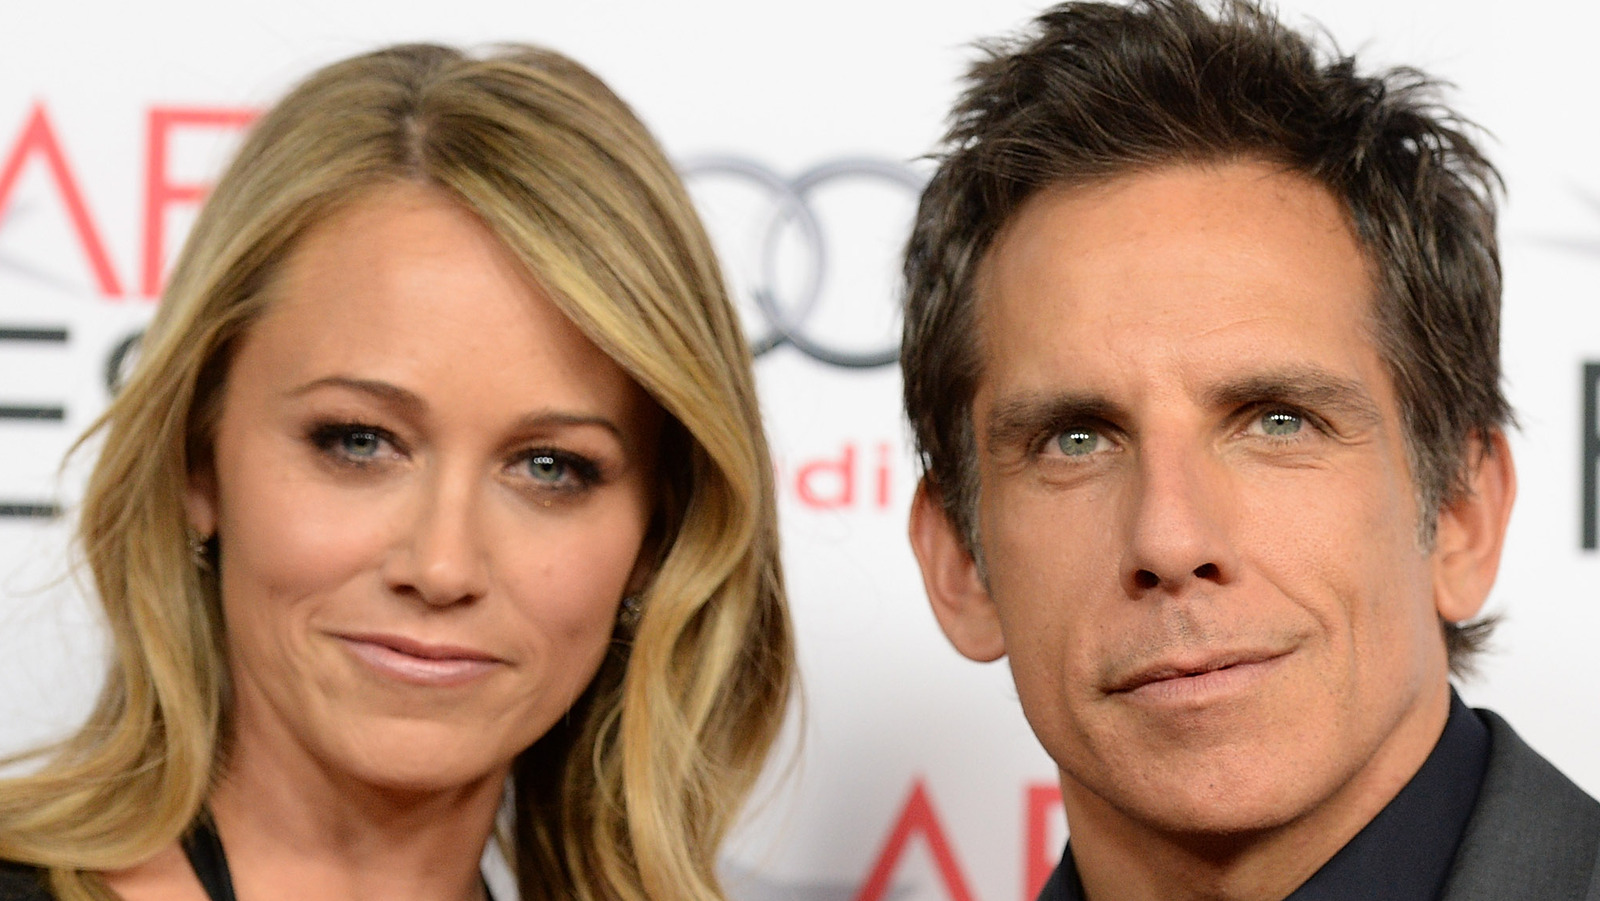 ben stillers wife christine taylor opens up about healing their broken marriage